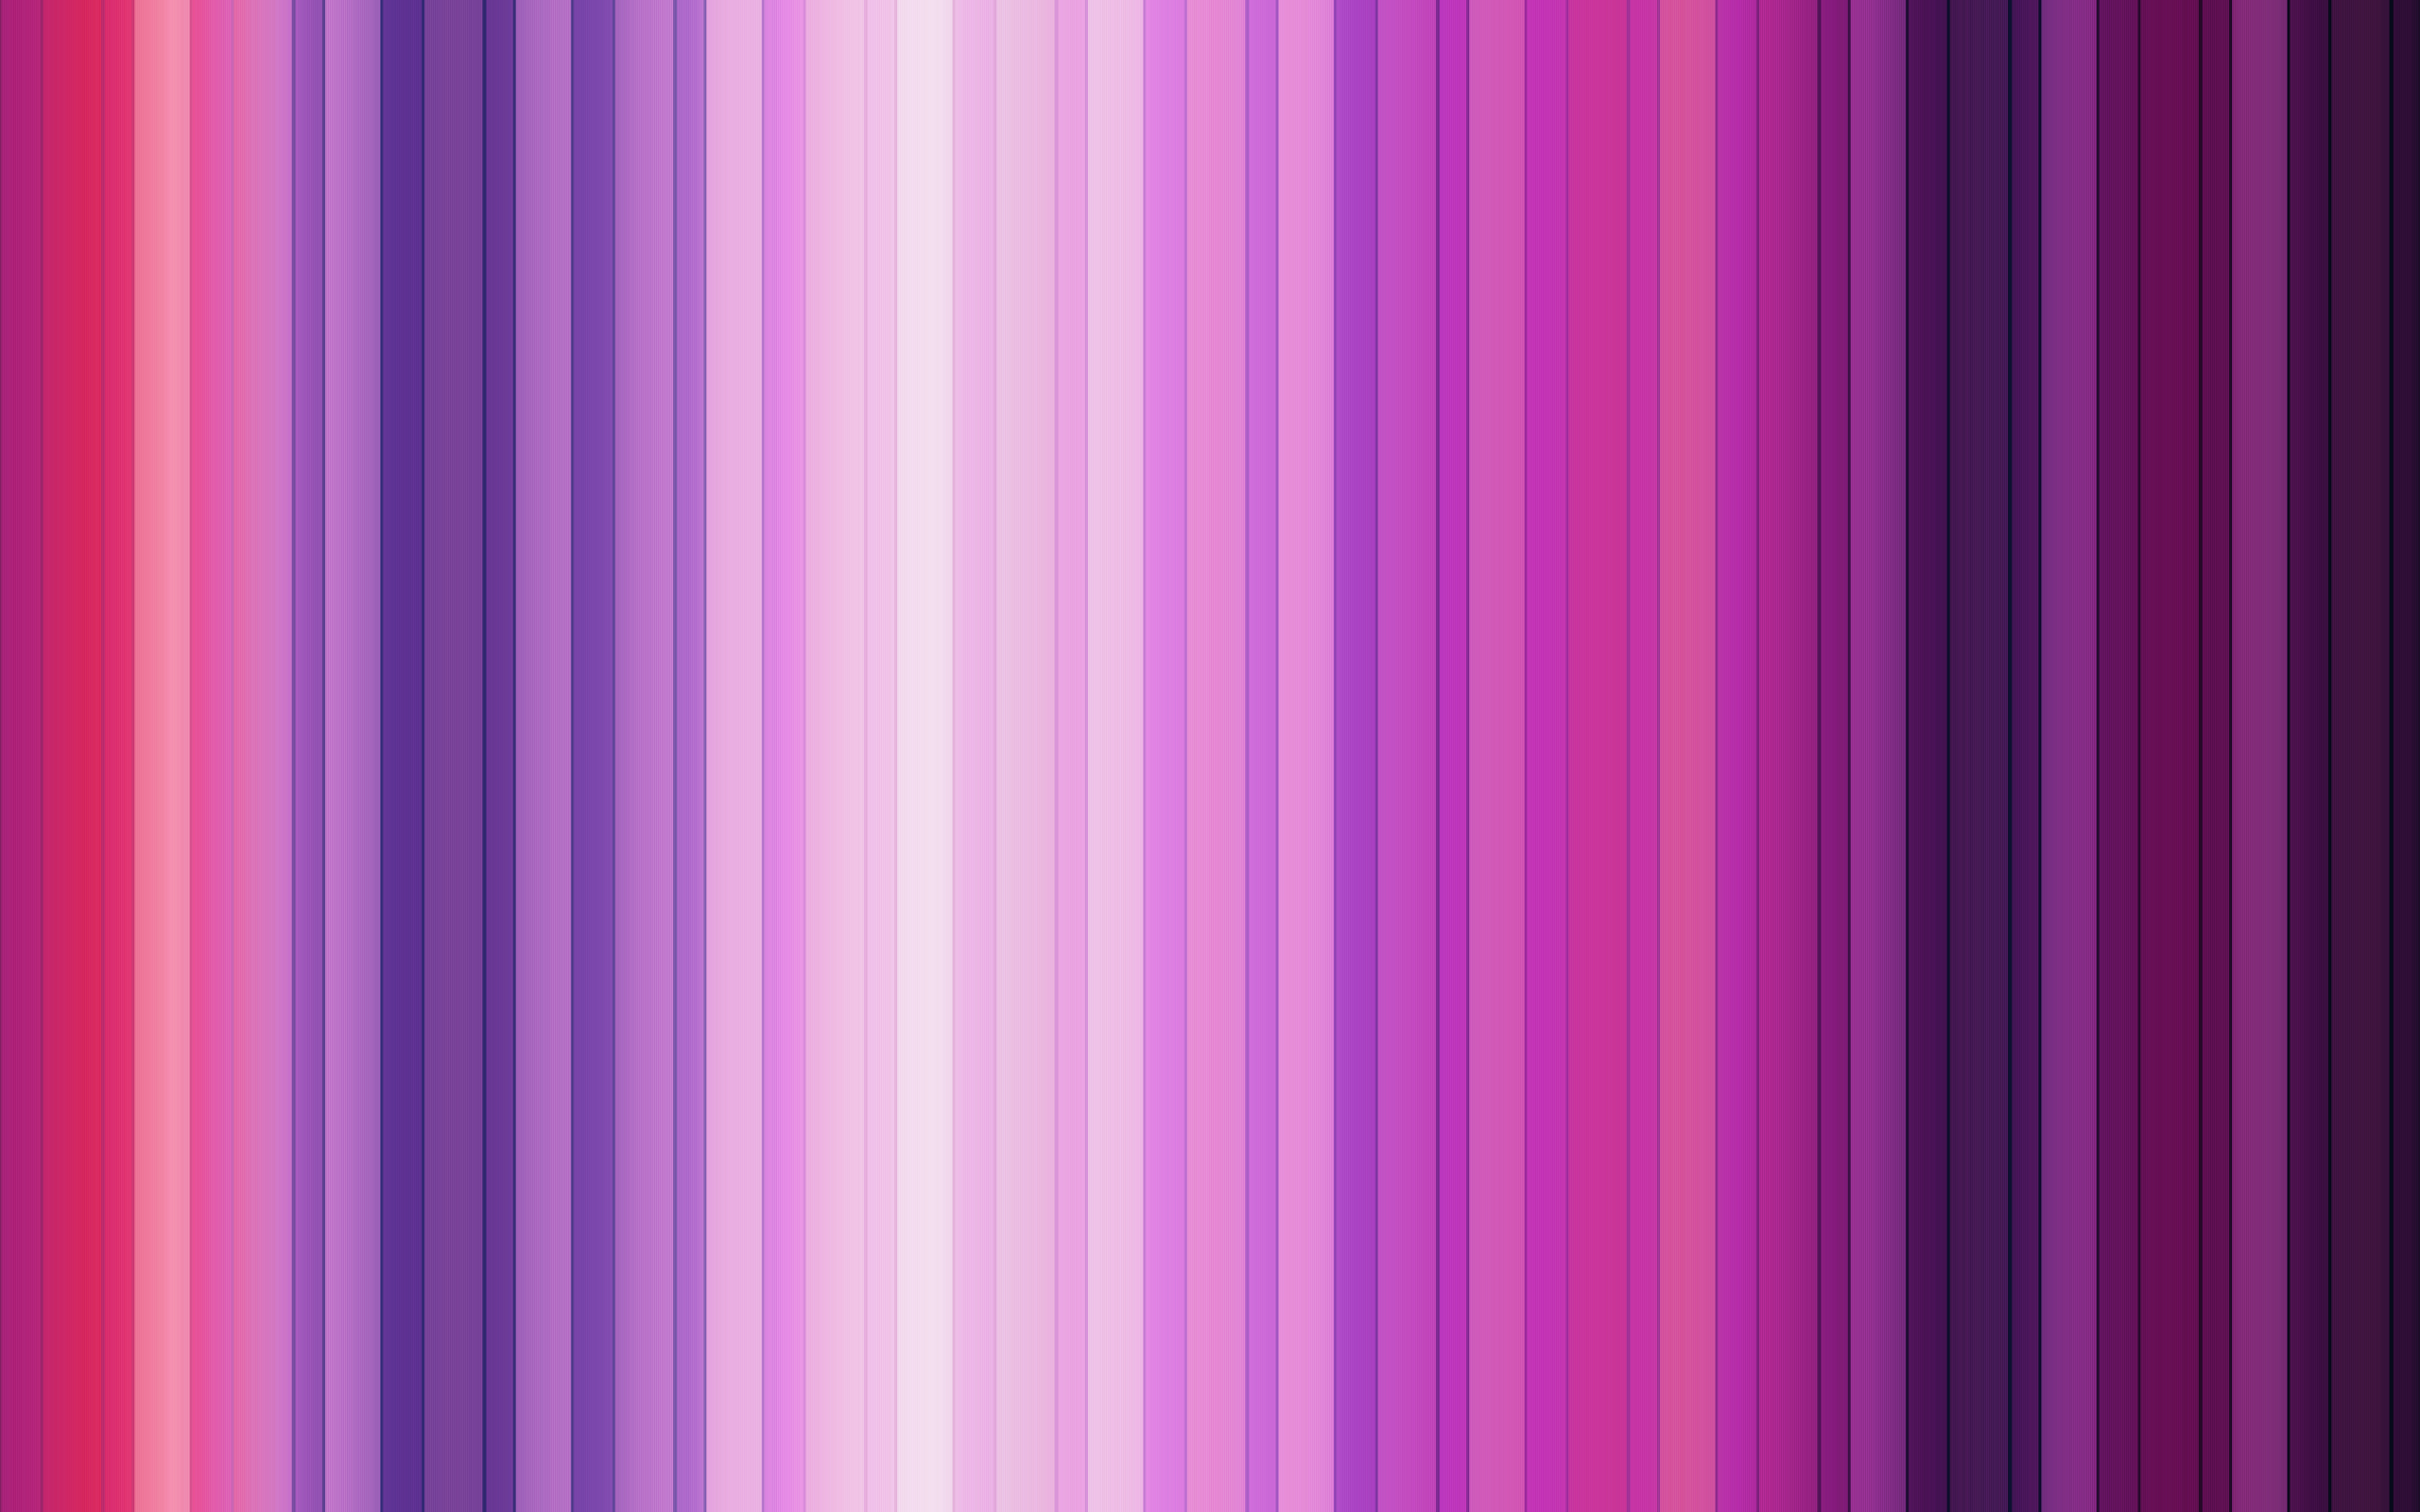 2048 pixels wide and 1152 pixels tall colorful wallpaper